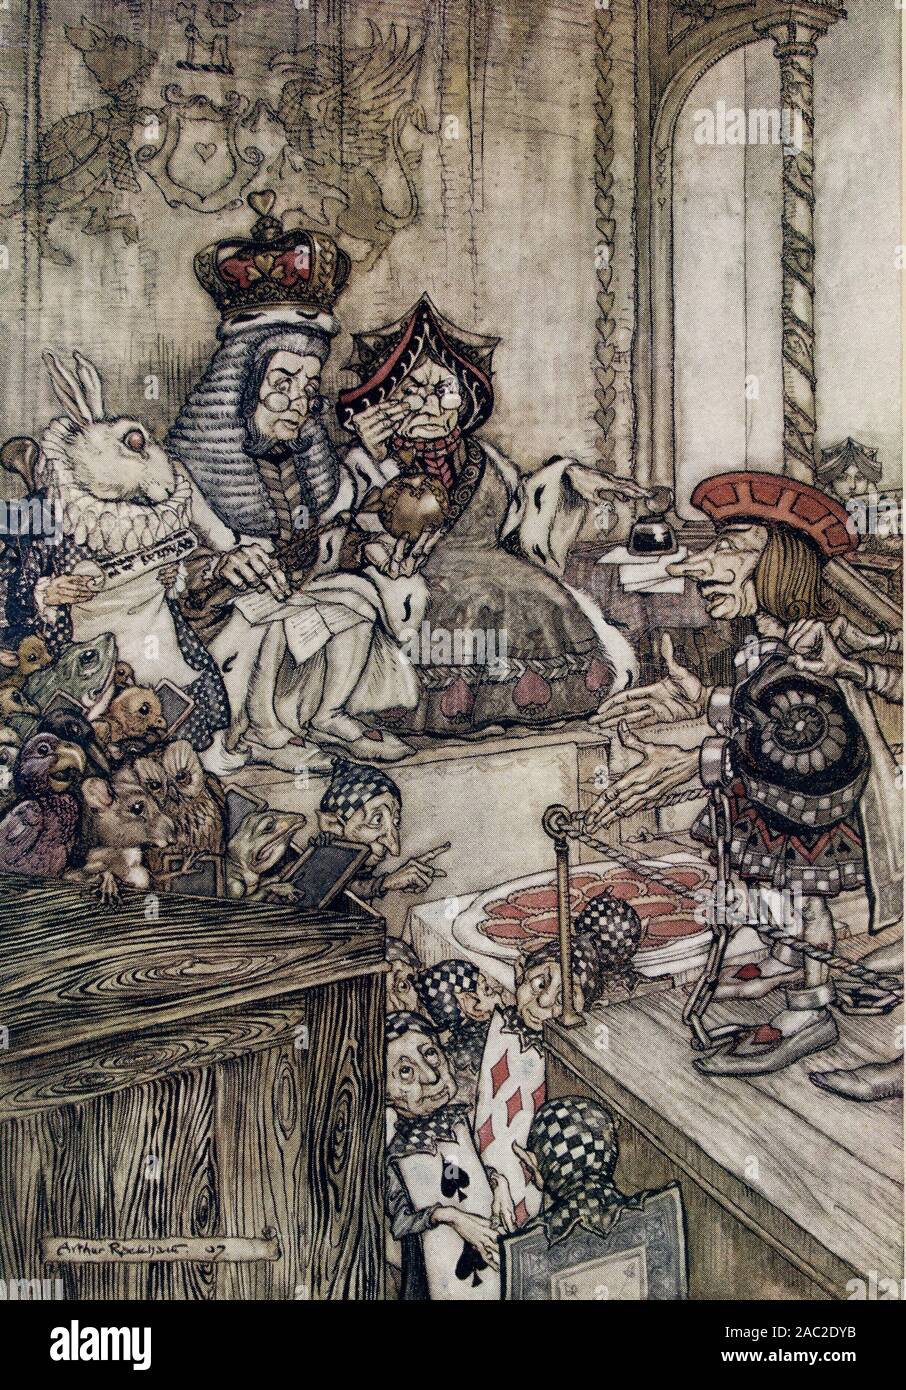 Arthur Rackham's illustration for the 1907 edition of Lewis Carroll's ALICE IN WONDERLAND - 'Who stole the tarts?' Stock Photo